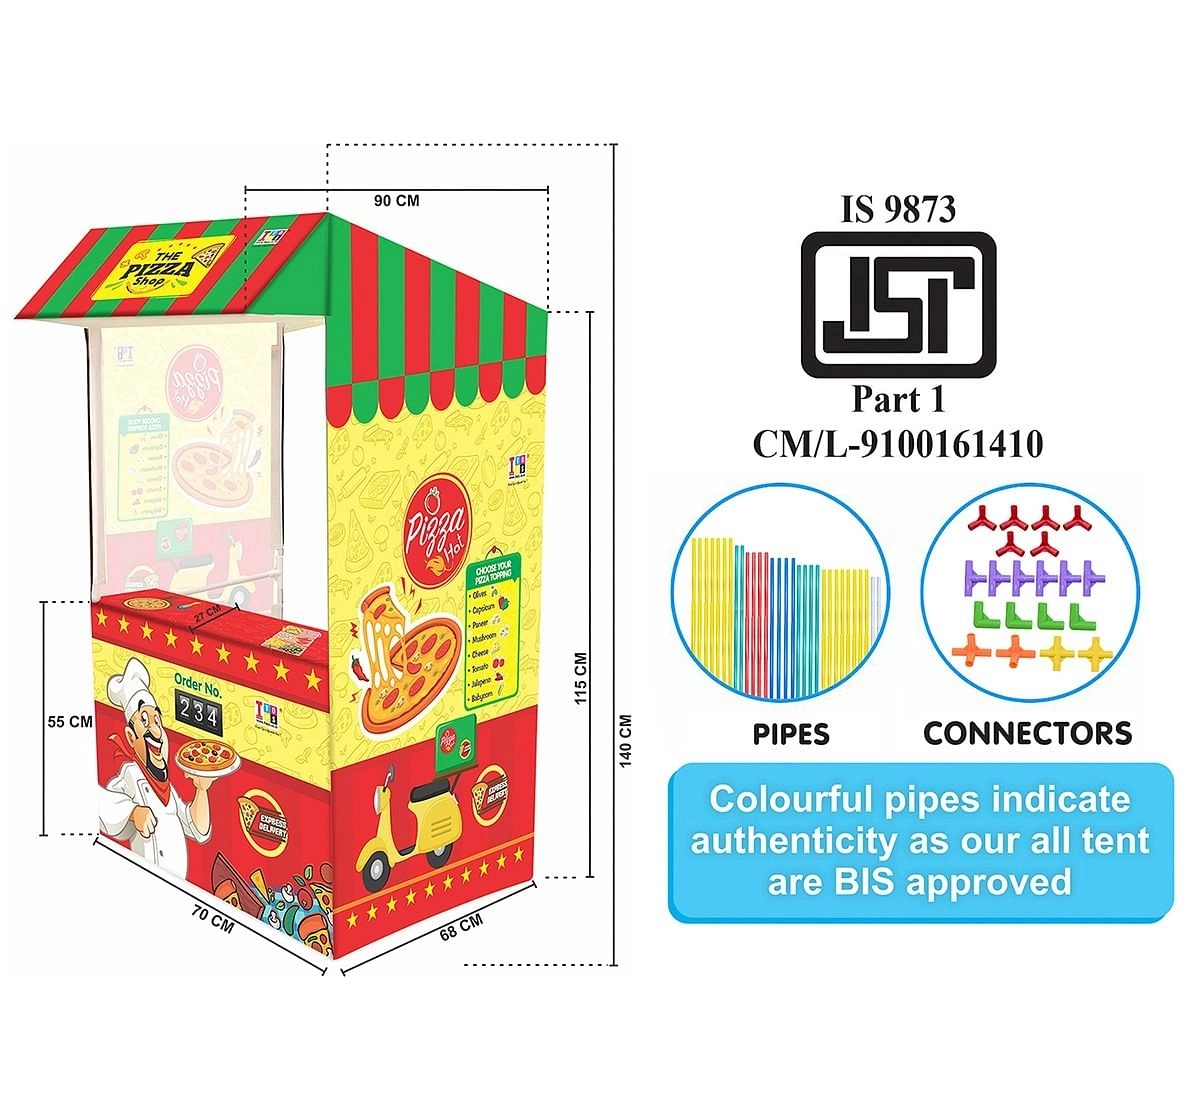 IToys Pizza shop Play House Tent with Doctor role play set for kids, 2Y+ (Multicolour)